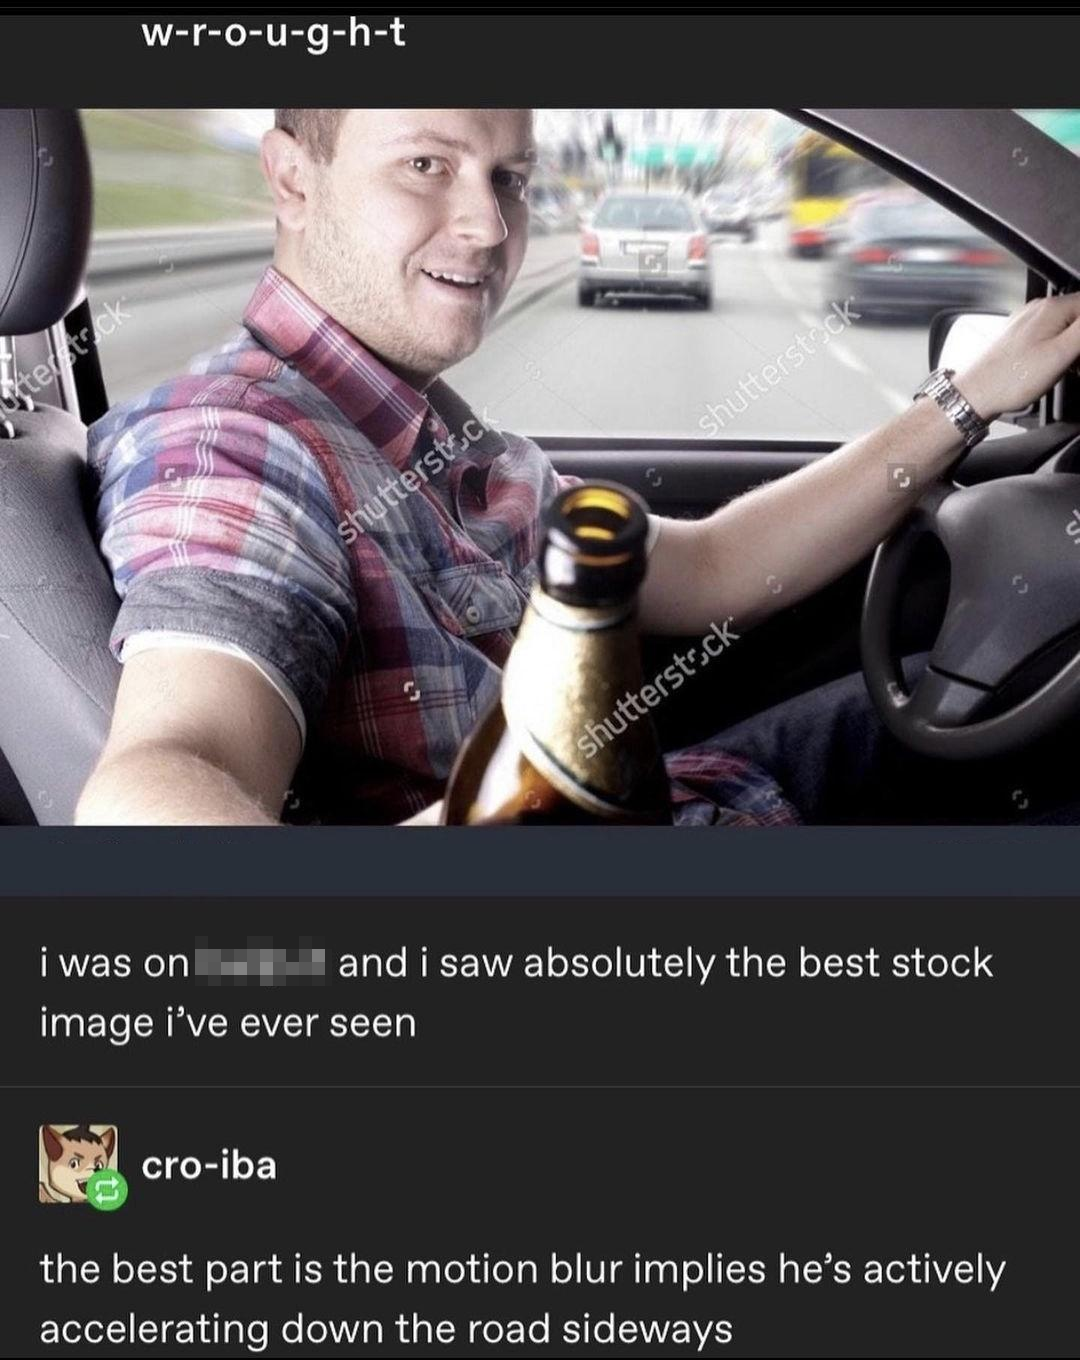 beer driving stock - wrought terstock shutterstock i was on image i've ever seen shutterstock and i saw absolutely the best stock croiba the best part is the motion blur implies he's actively accelerating down the road sideways